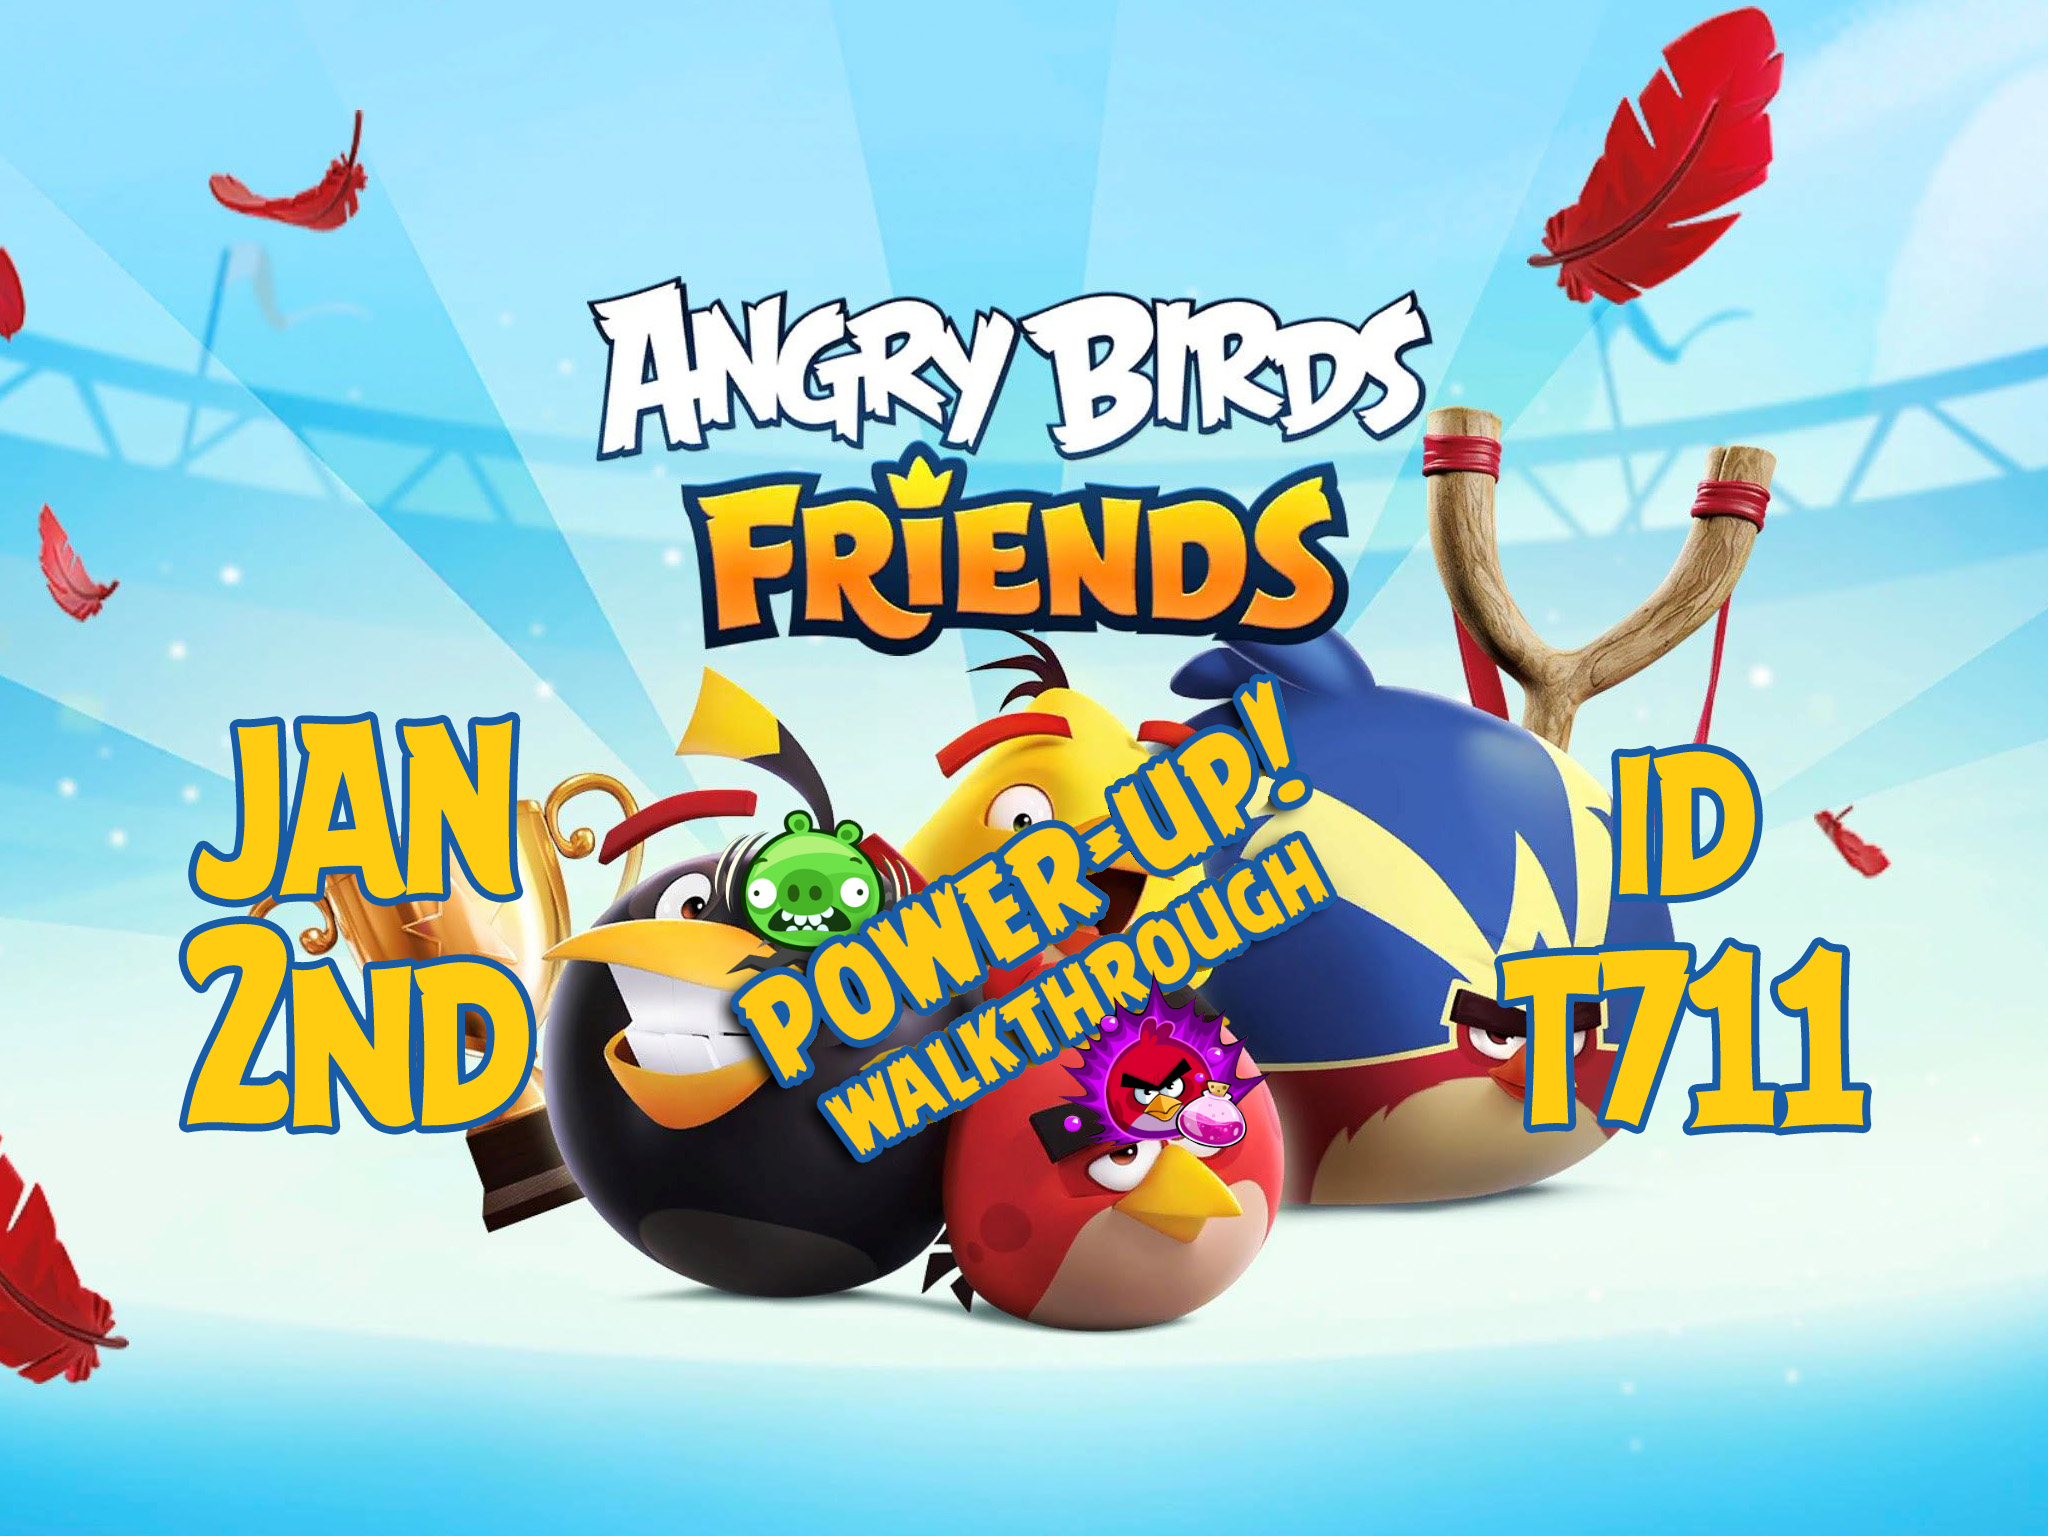 Angry-Birds-Friends-Tournament-T711-Feature-Image-PU